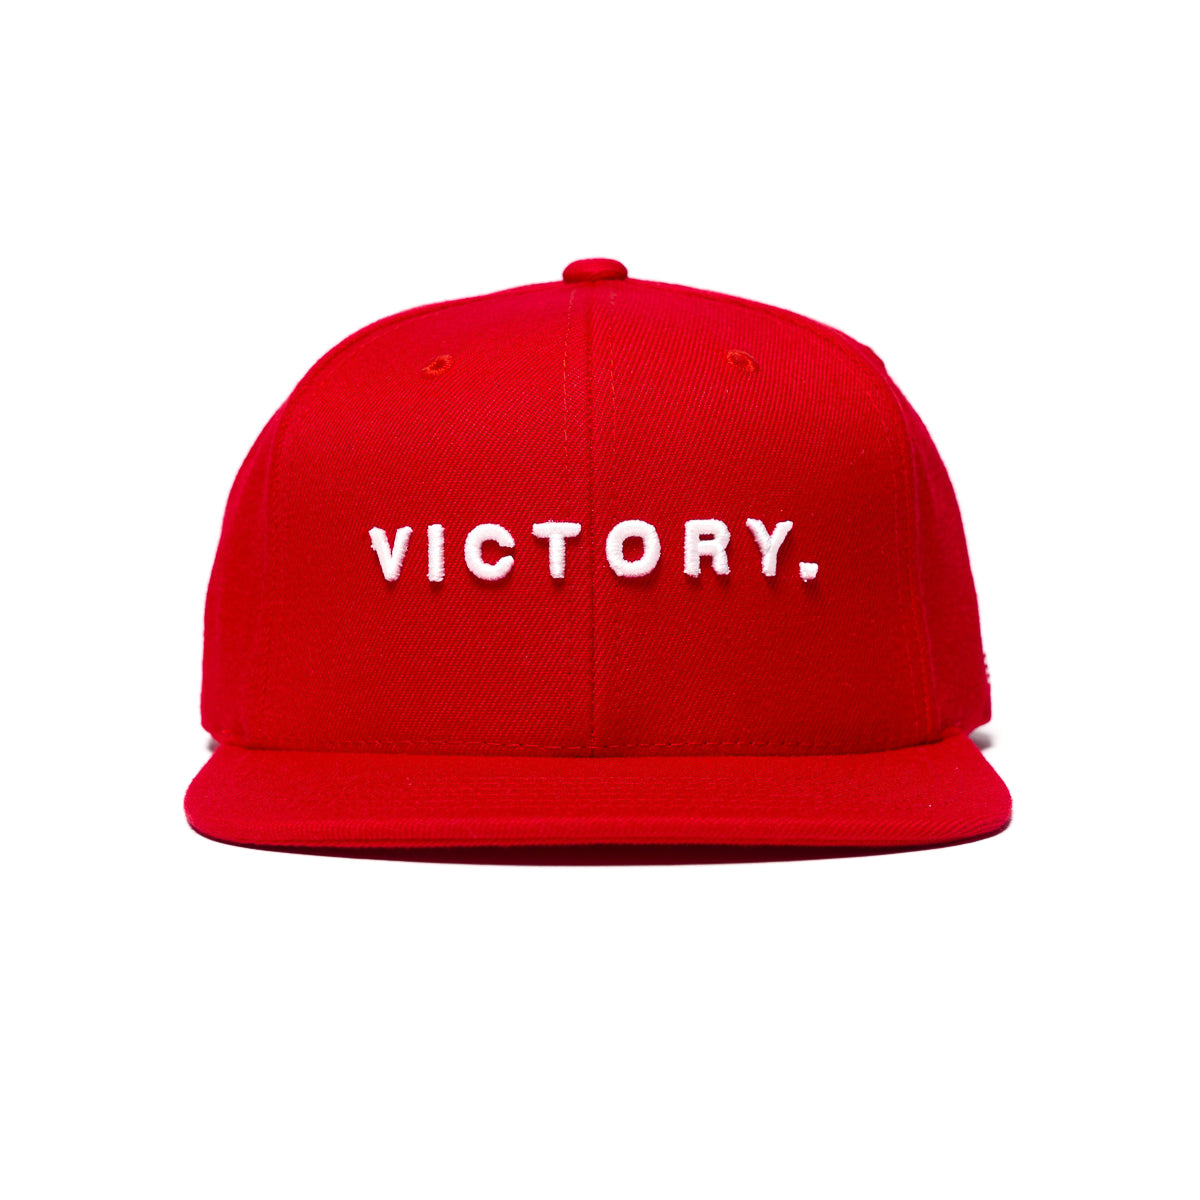 Victory Limited Edition Snapback - Red/White